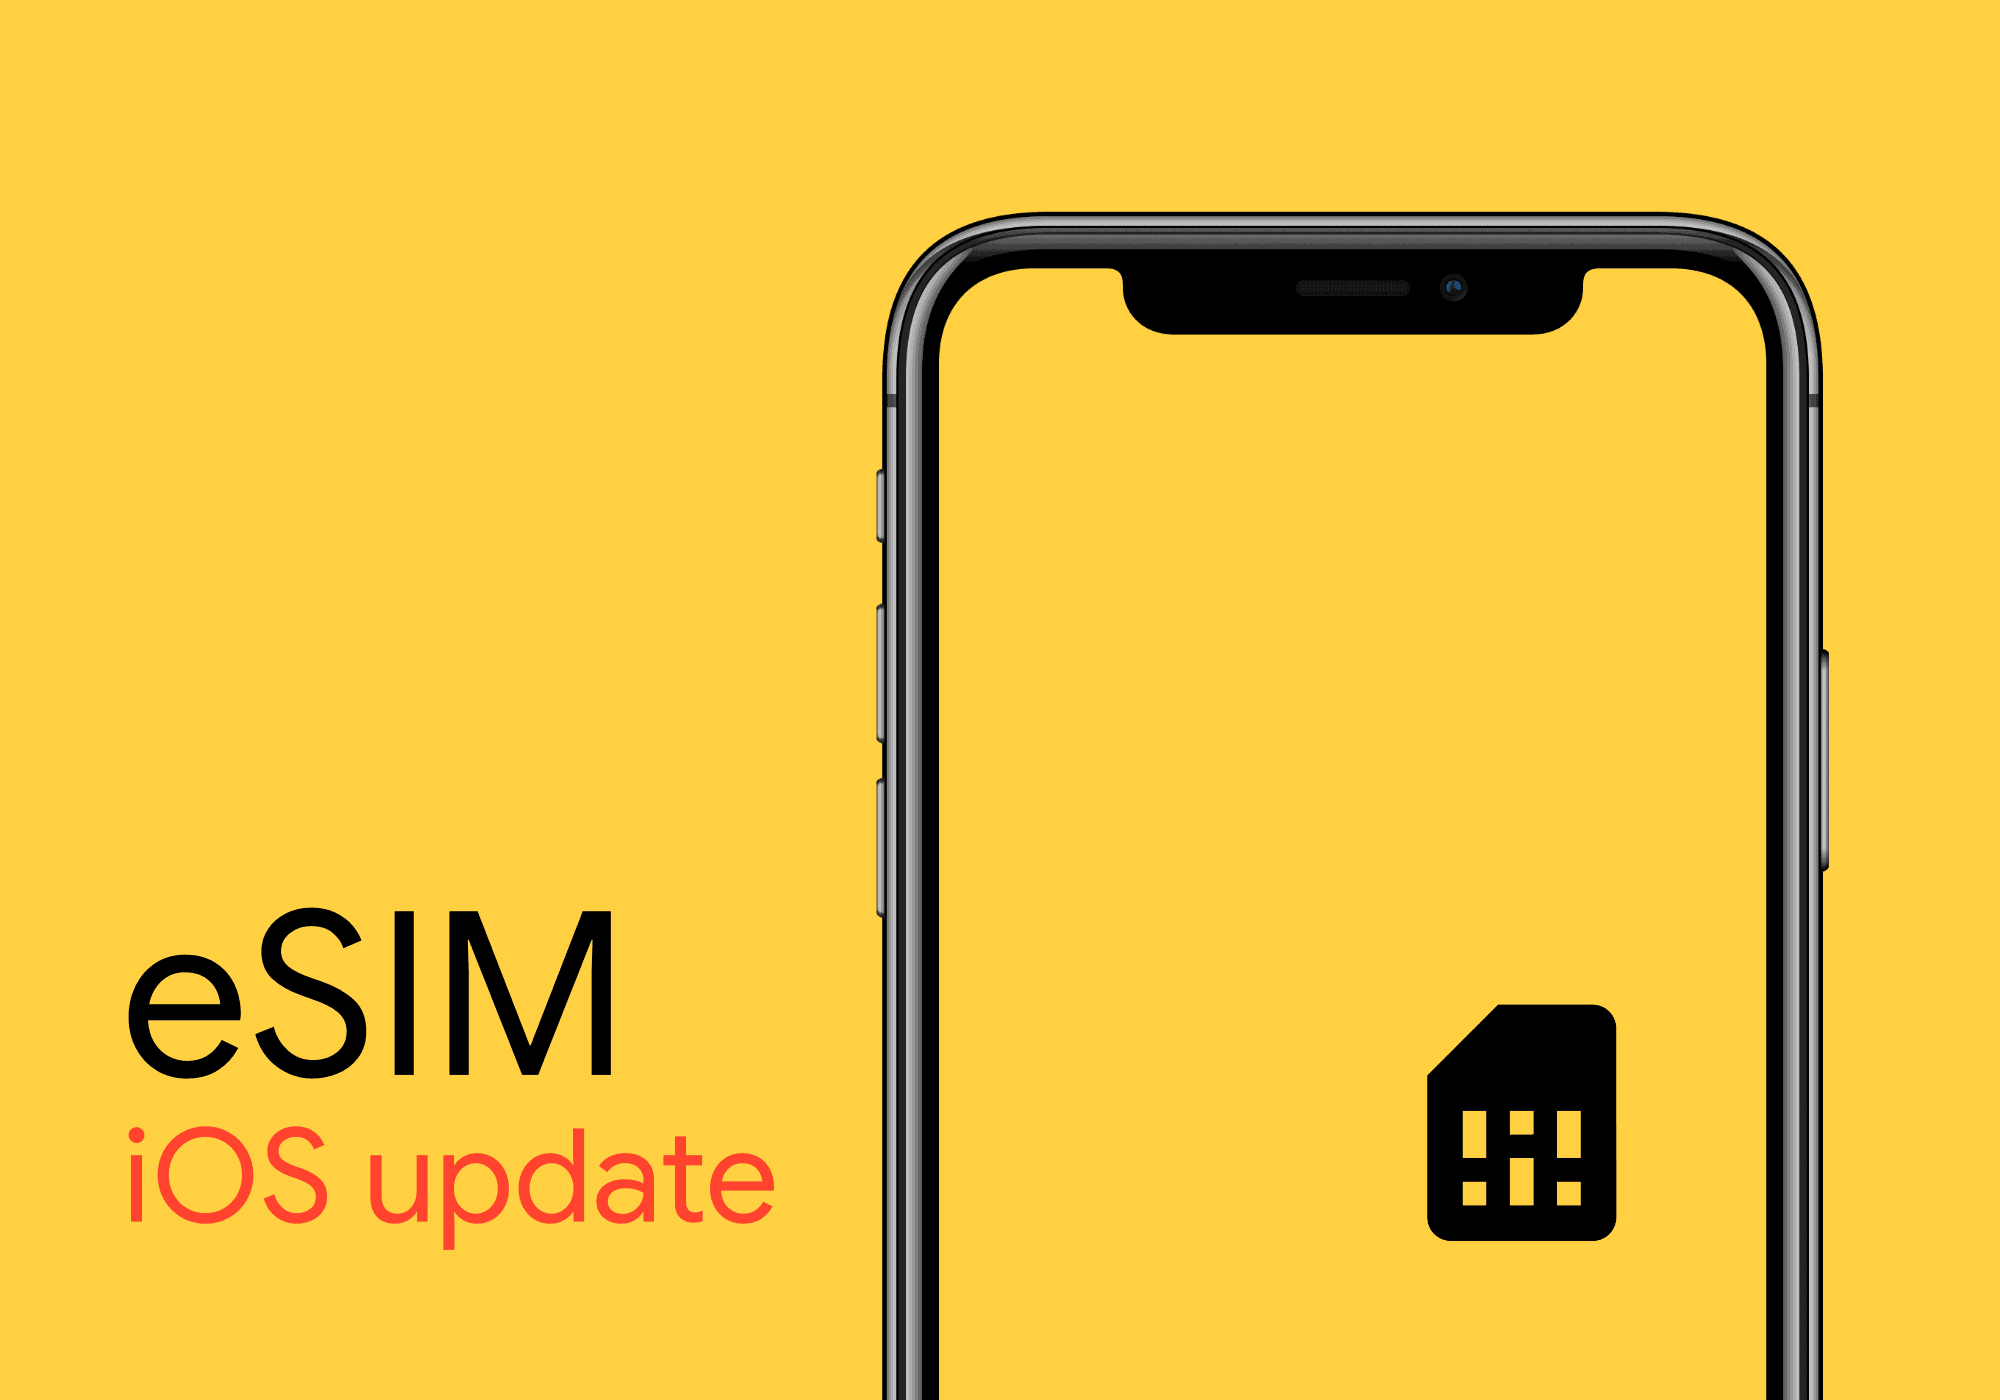 eSIM update for iPhone XS and iPhone XR: When will it release?